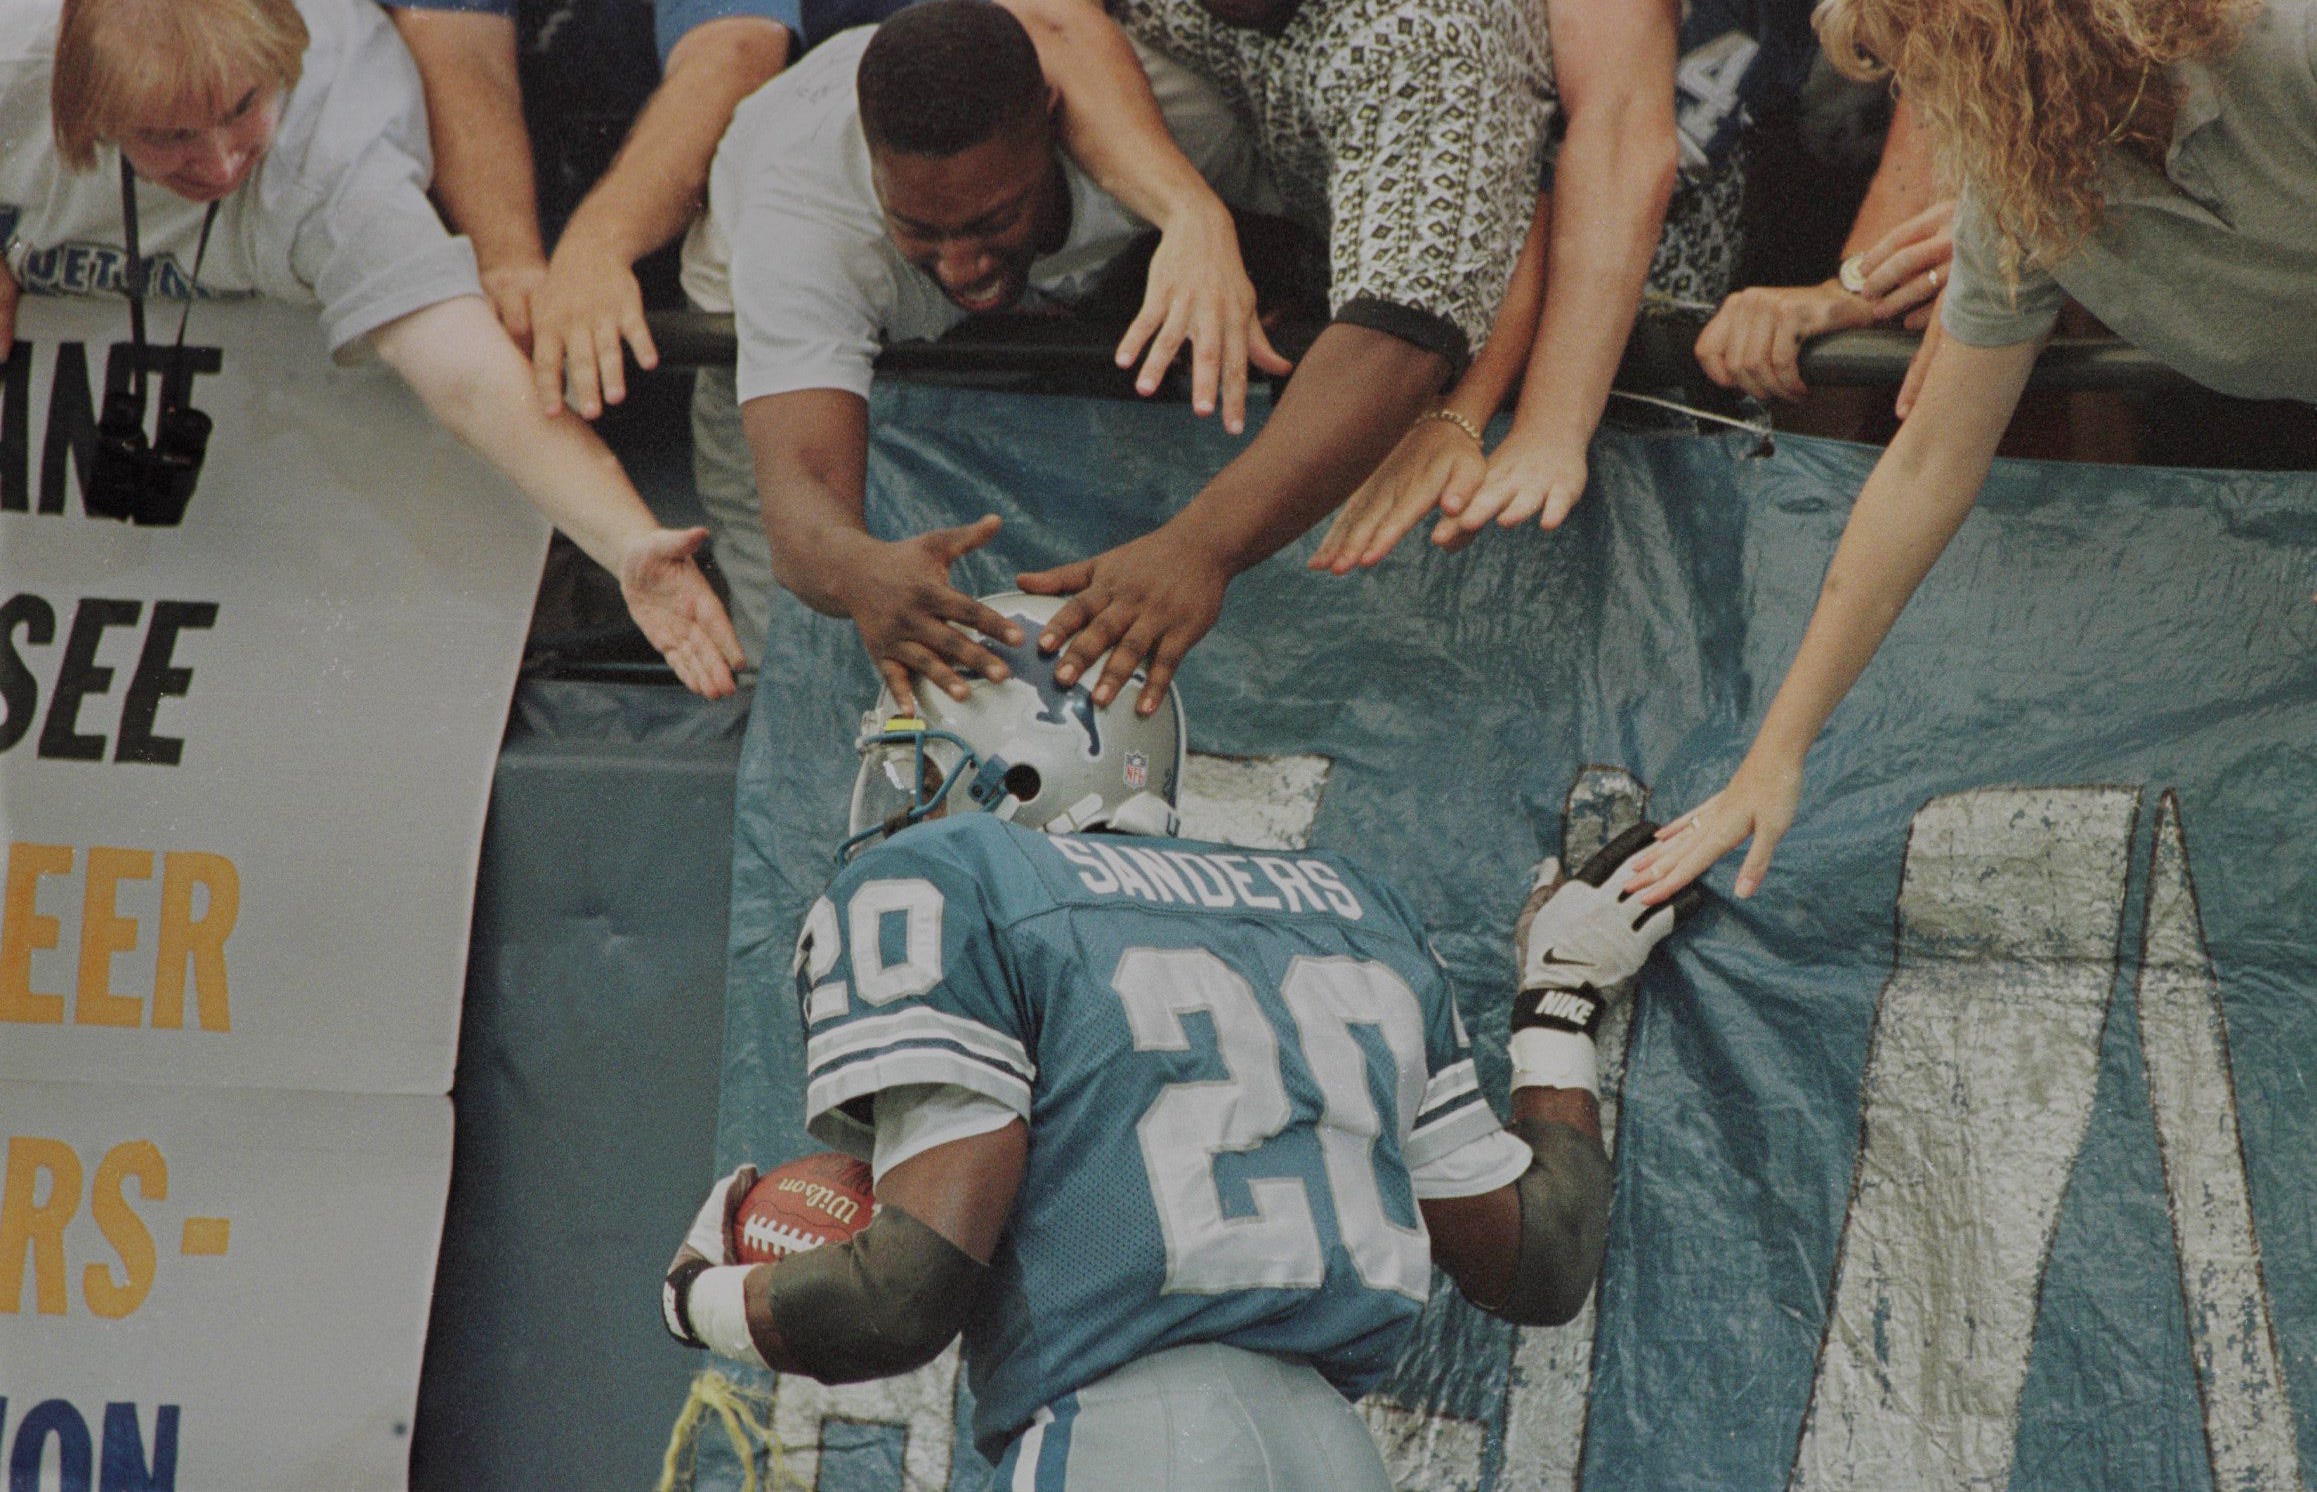 Barry Sanders celebrates with fans after a touchdown against the Tampa Bay Buccaneers in Detroit on Sept. 9, 1996.